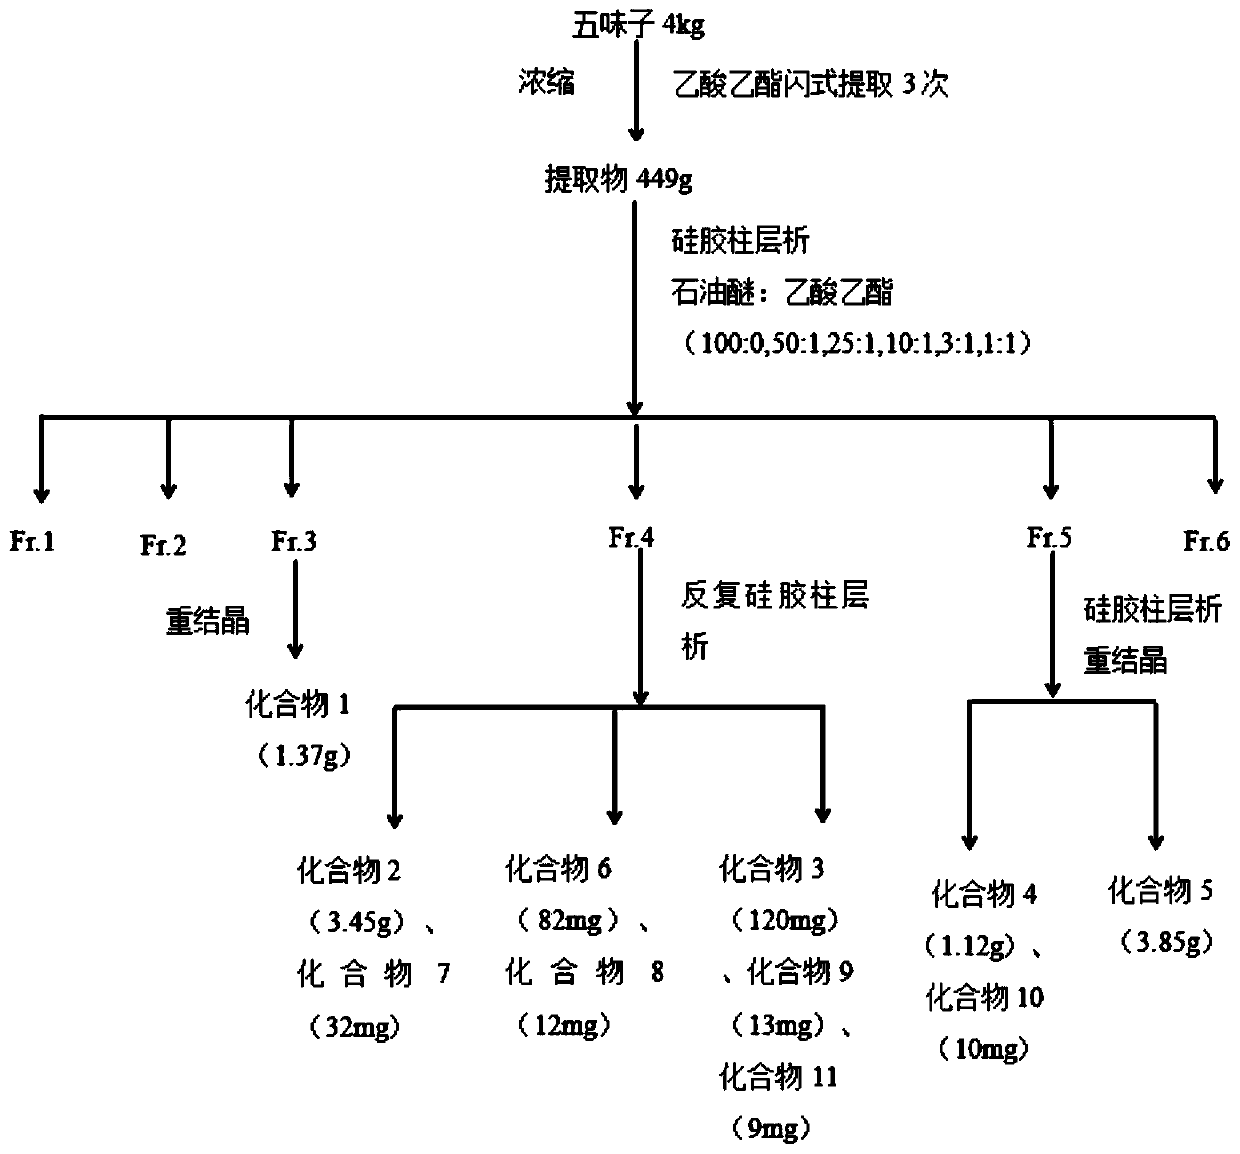 Method for extraction and content determination of lignan components of Chinese magnoliavine fruit